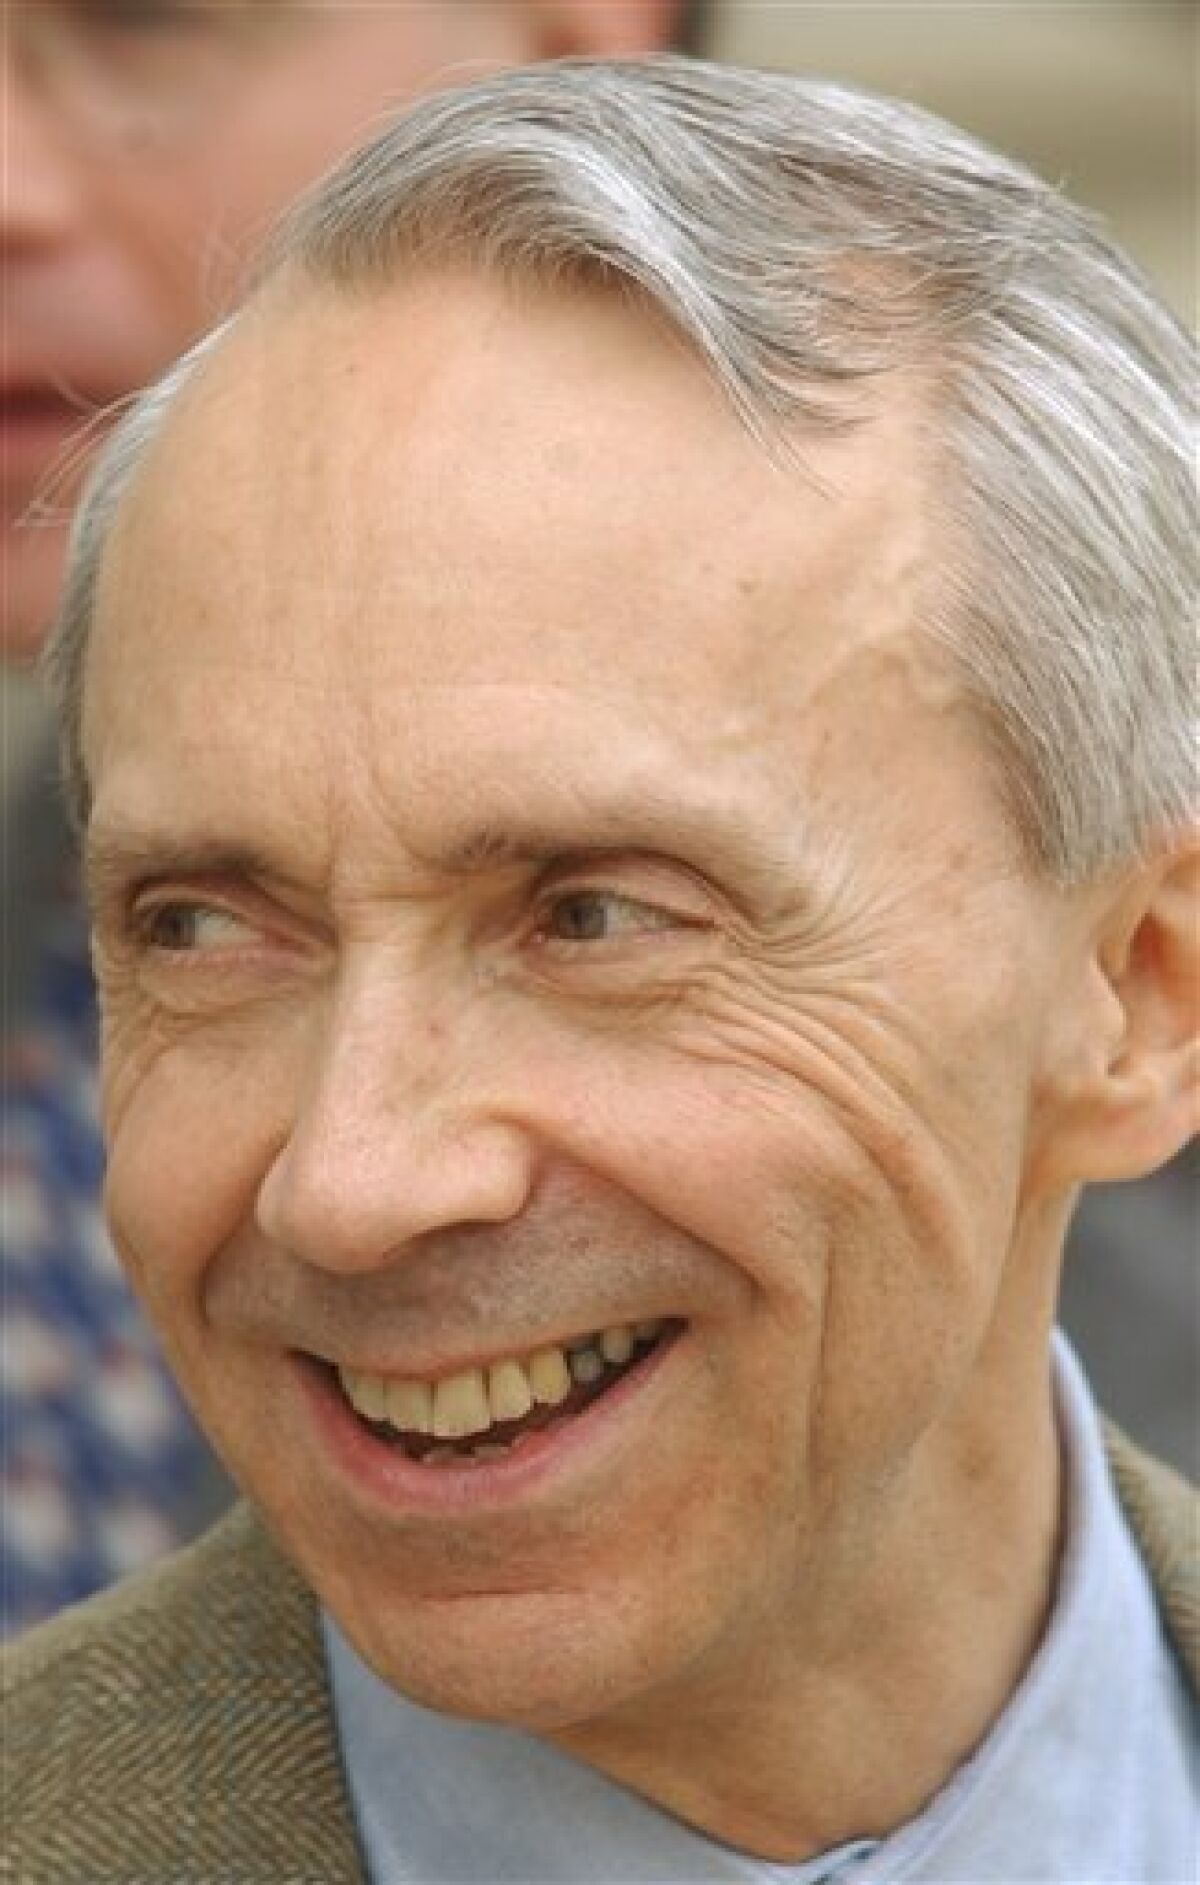 FILE - In this April 7, 2005 file photo, U.S. Supreme Court Justice David Souter talks with friends in Concord, N.H., while he visited his native New Hampshire on break from the court. (AP Photo/Jim Cole, File)